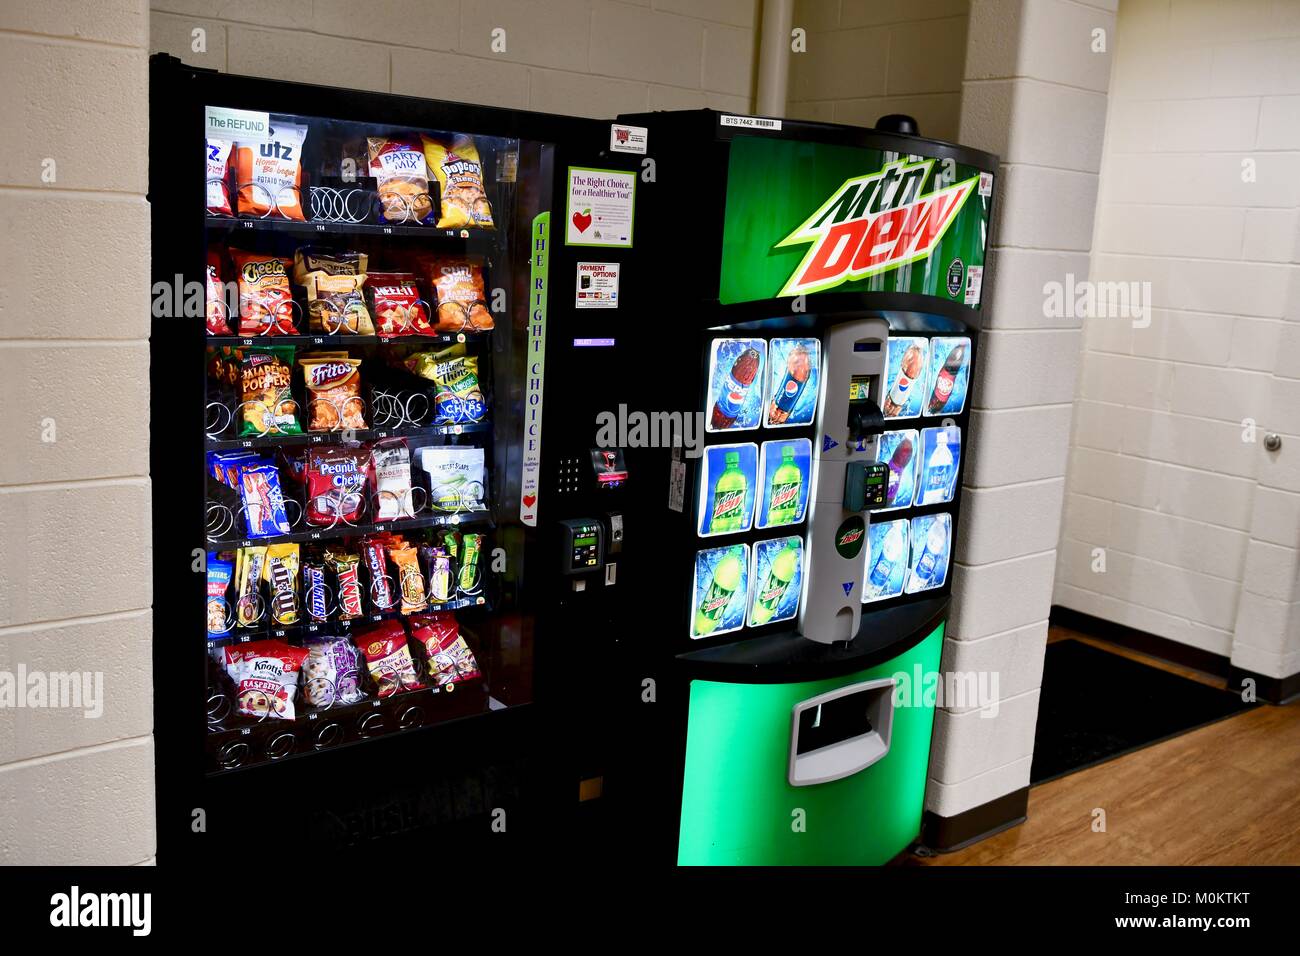 Vending machine for drinks and snacks Stock Photo